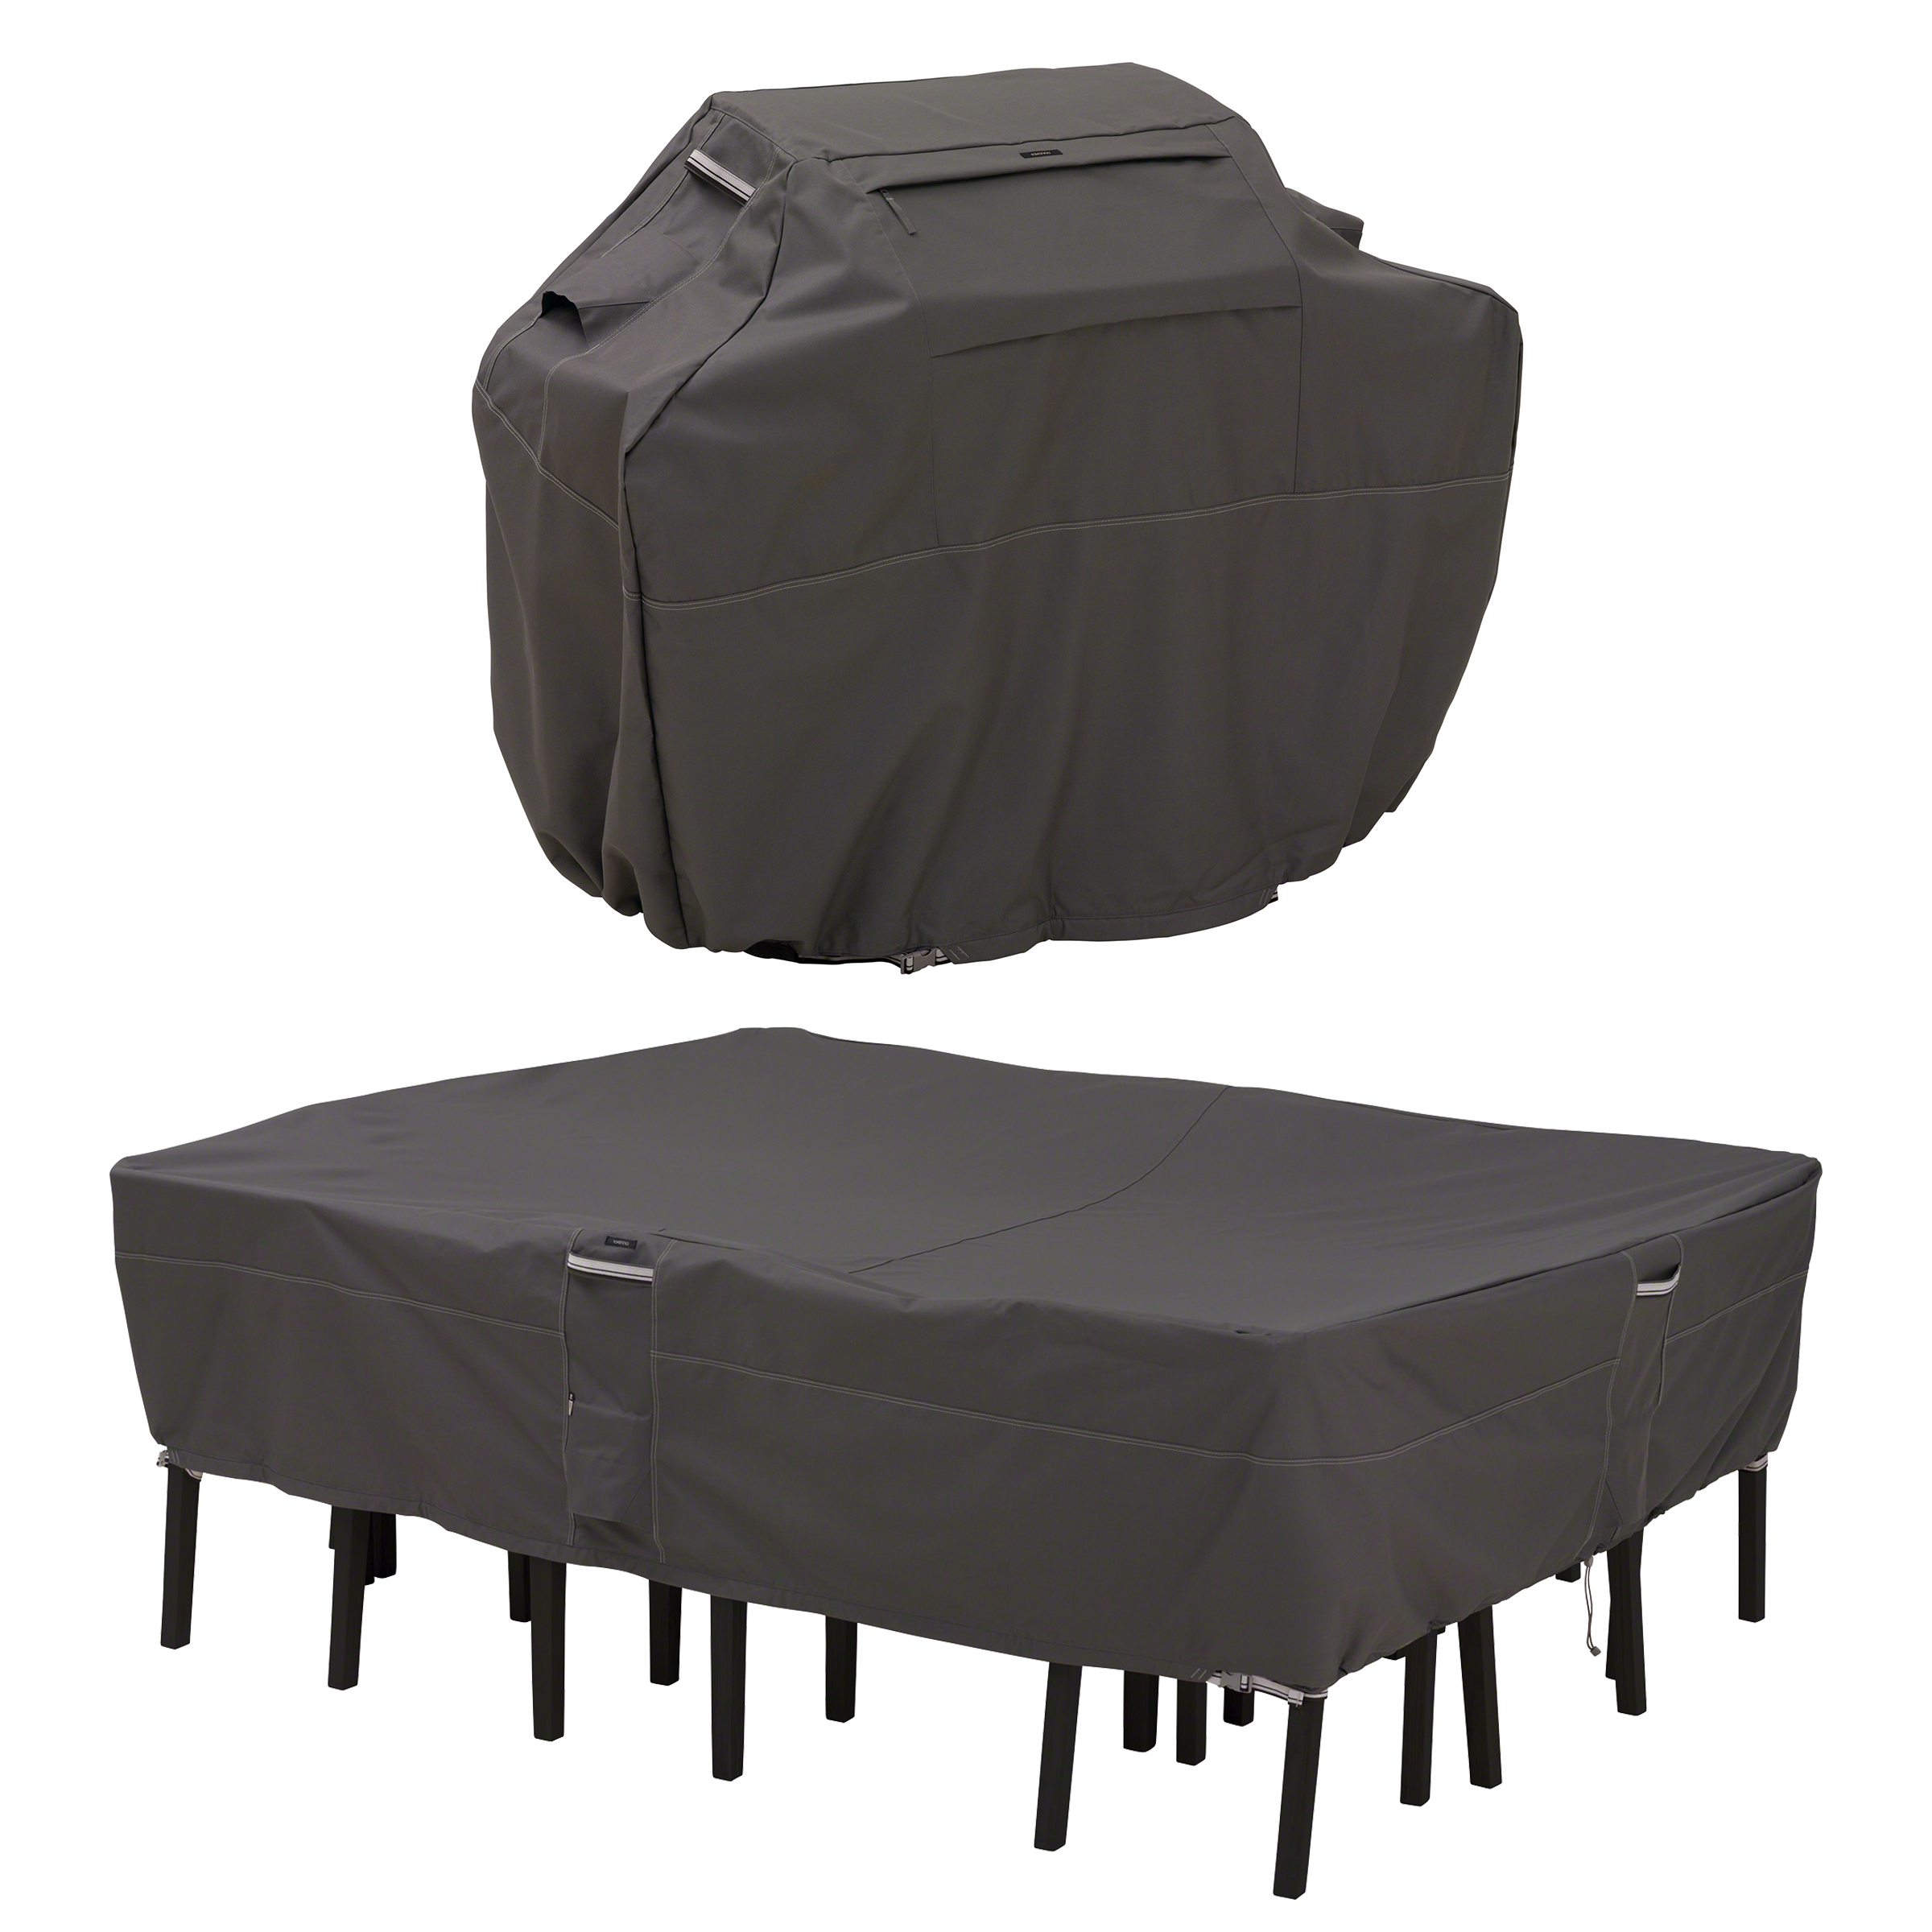 Classic Accessories Ravenna Water-Resistant 64 Inch BBQ Grill Cover and 108 Inch Rectangular/Oval Patio Table & Chair Set Cover Bundle - image 1 of 16